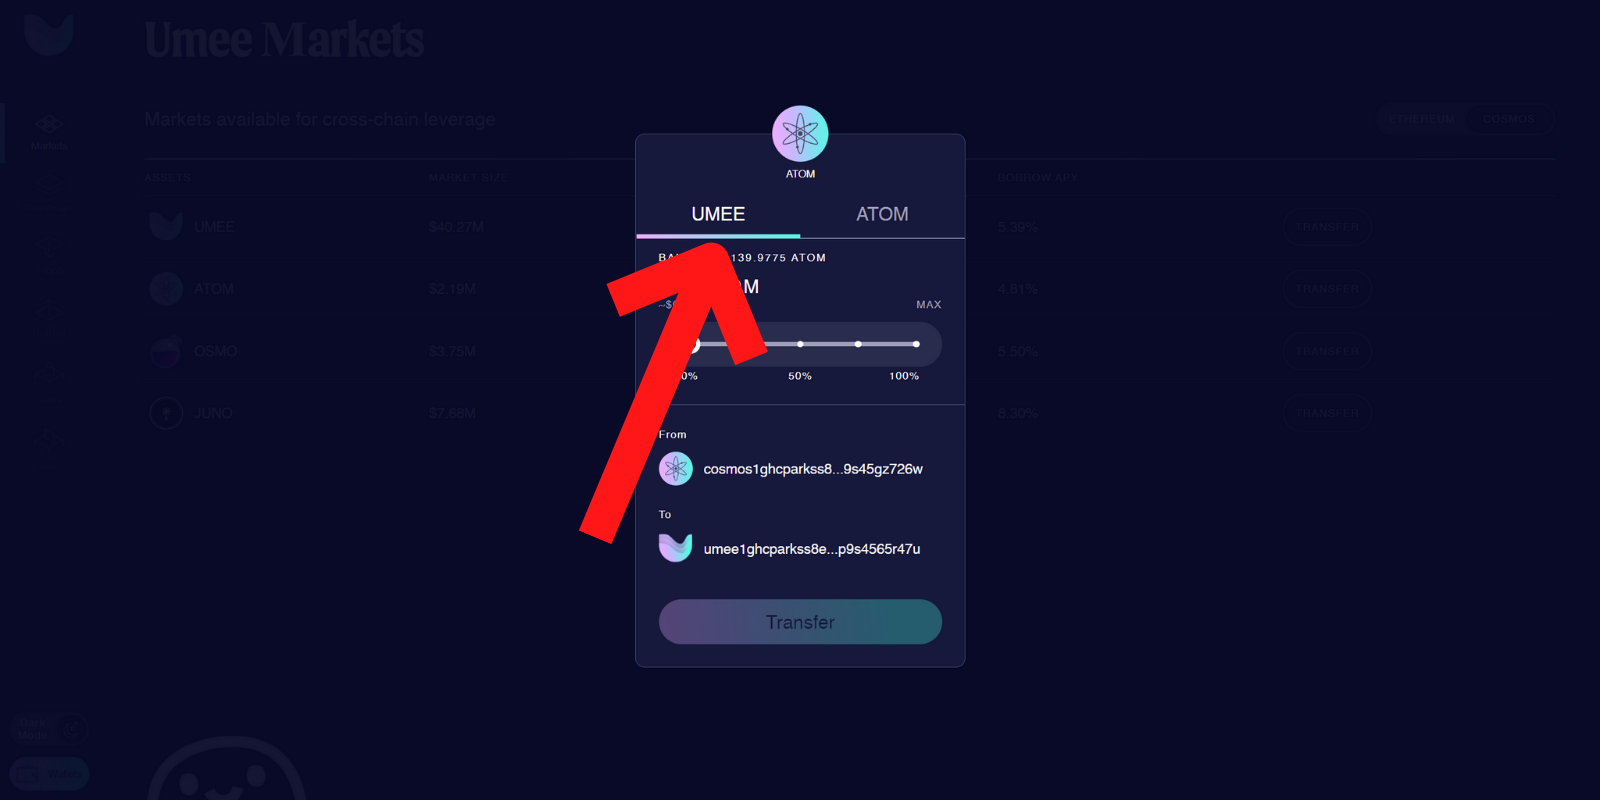 We will be selecting "UMEE" since we are transferring ATOM onto the Umee blockchain.